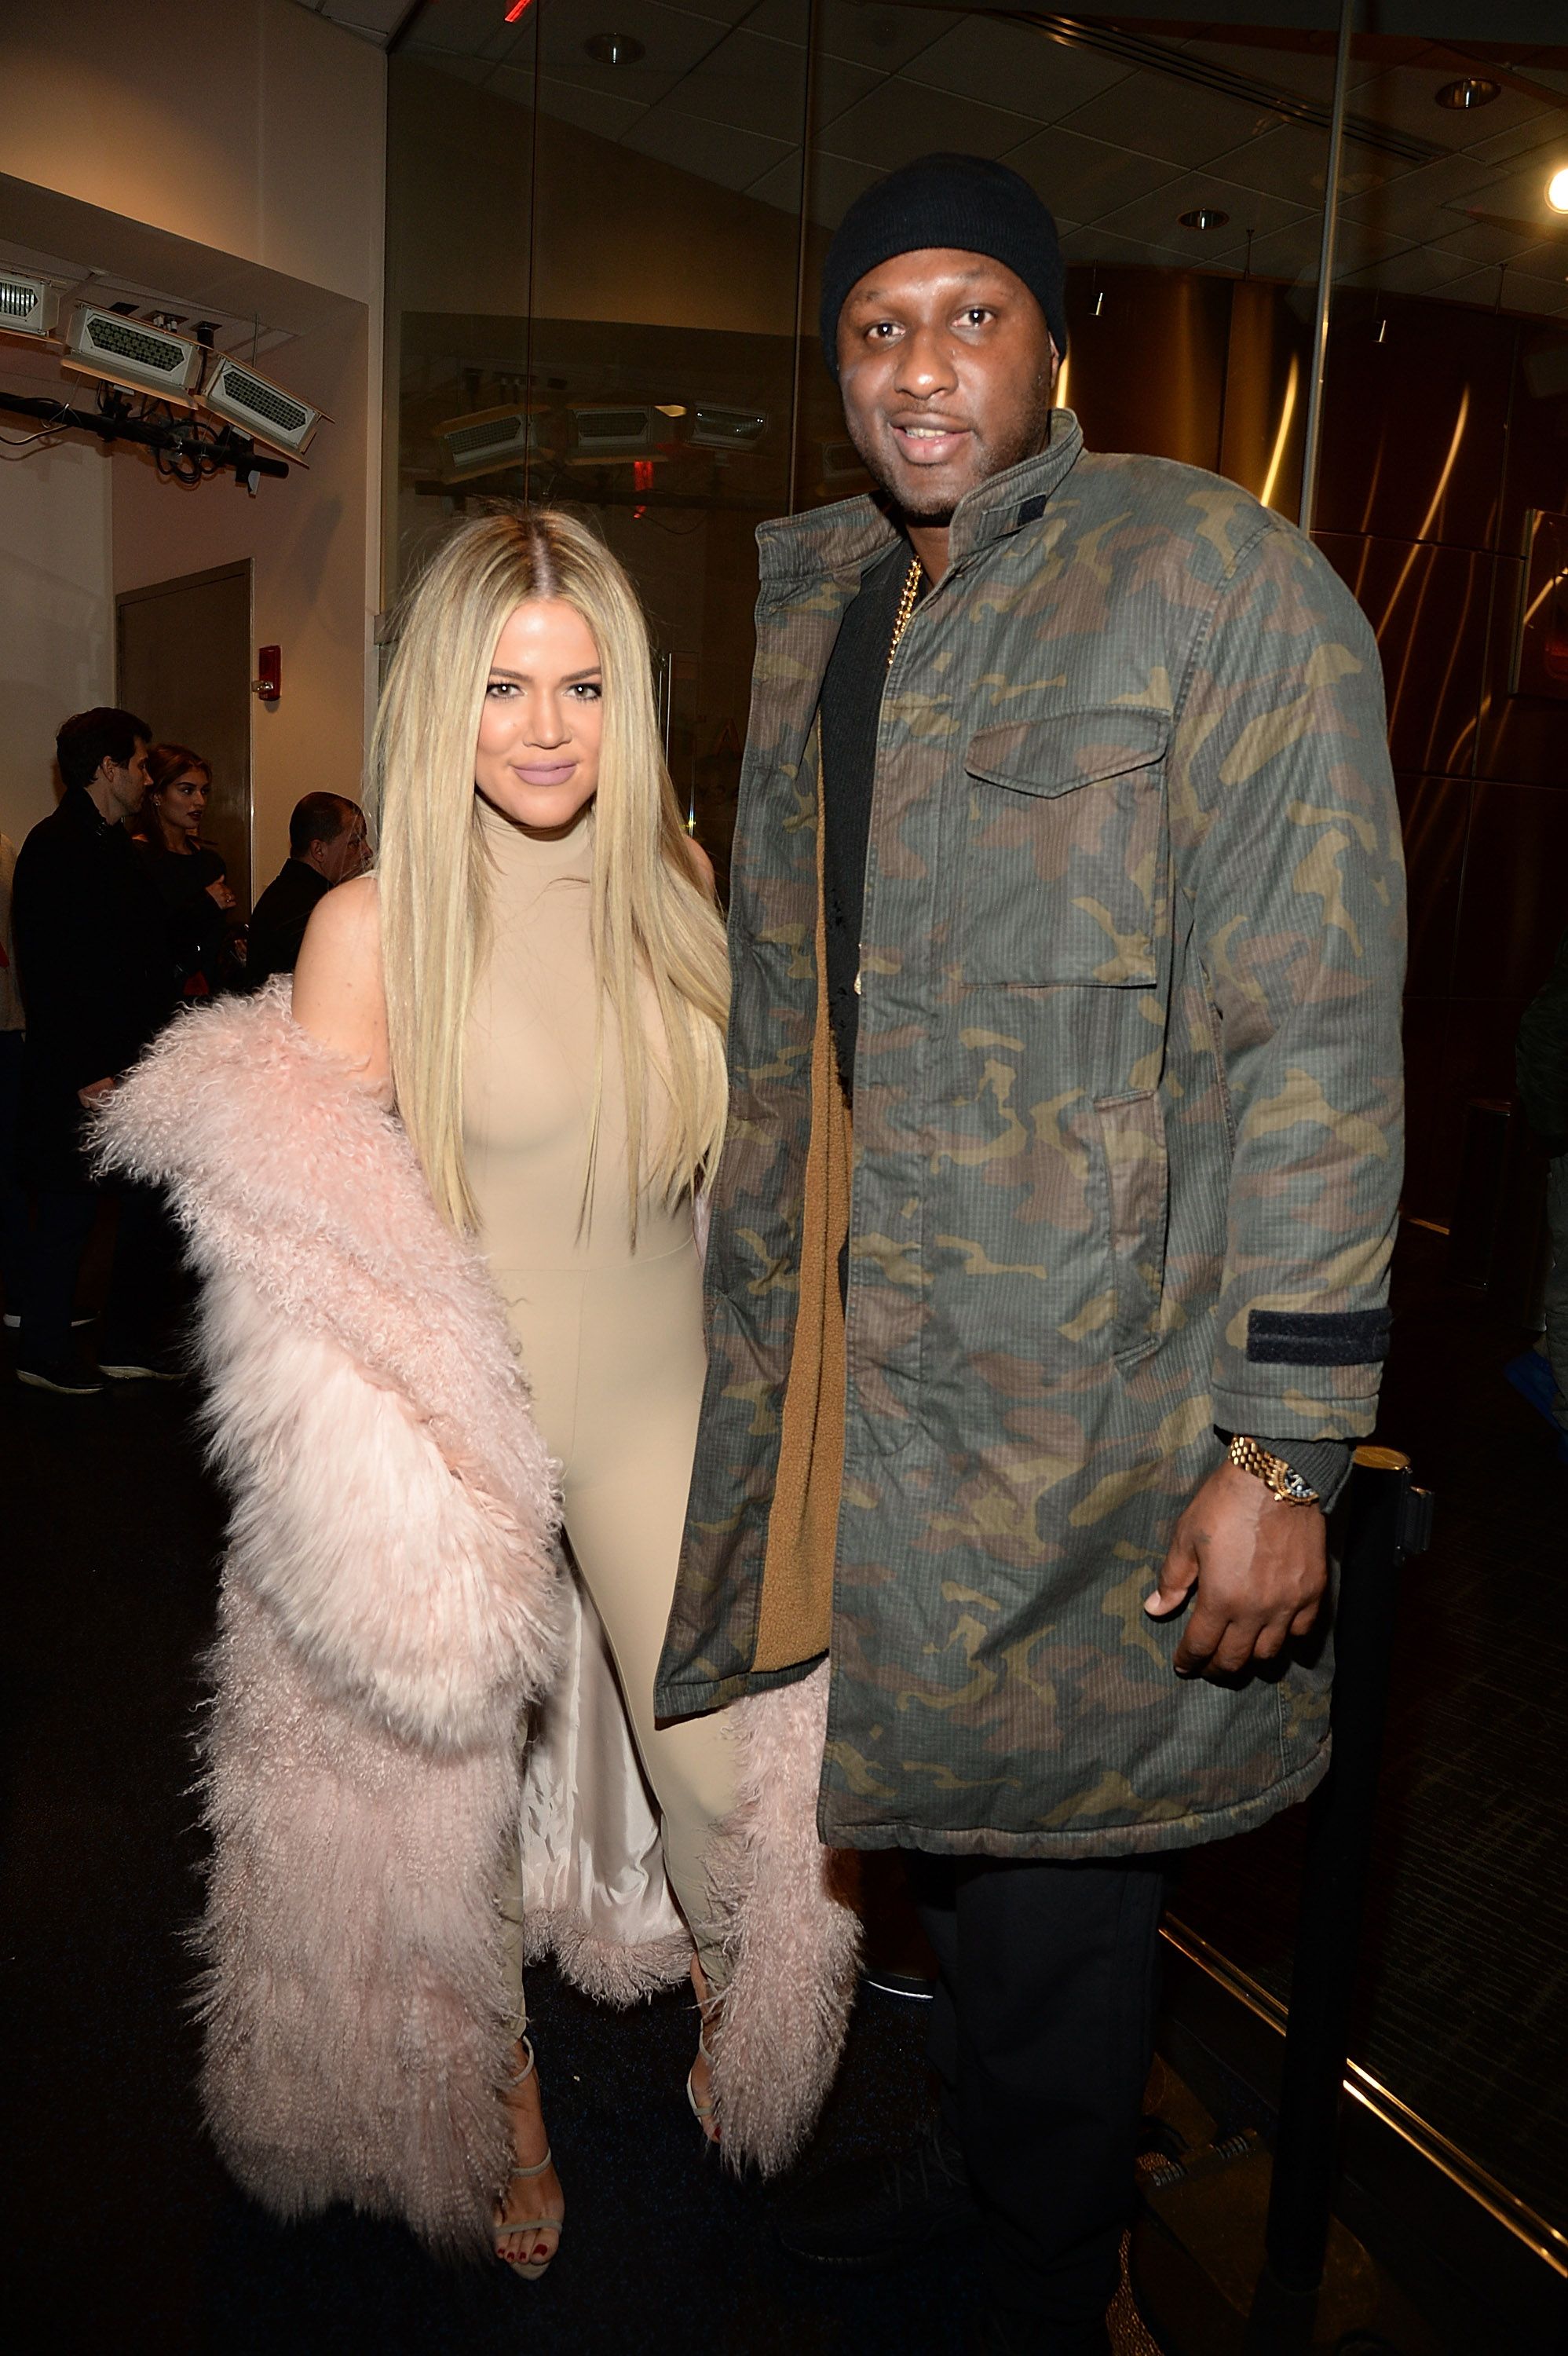 How long were khloe and lamar hookup before getting engaged